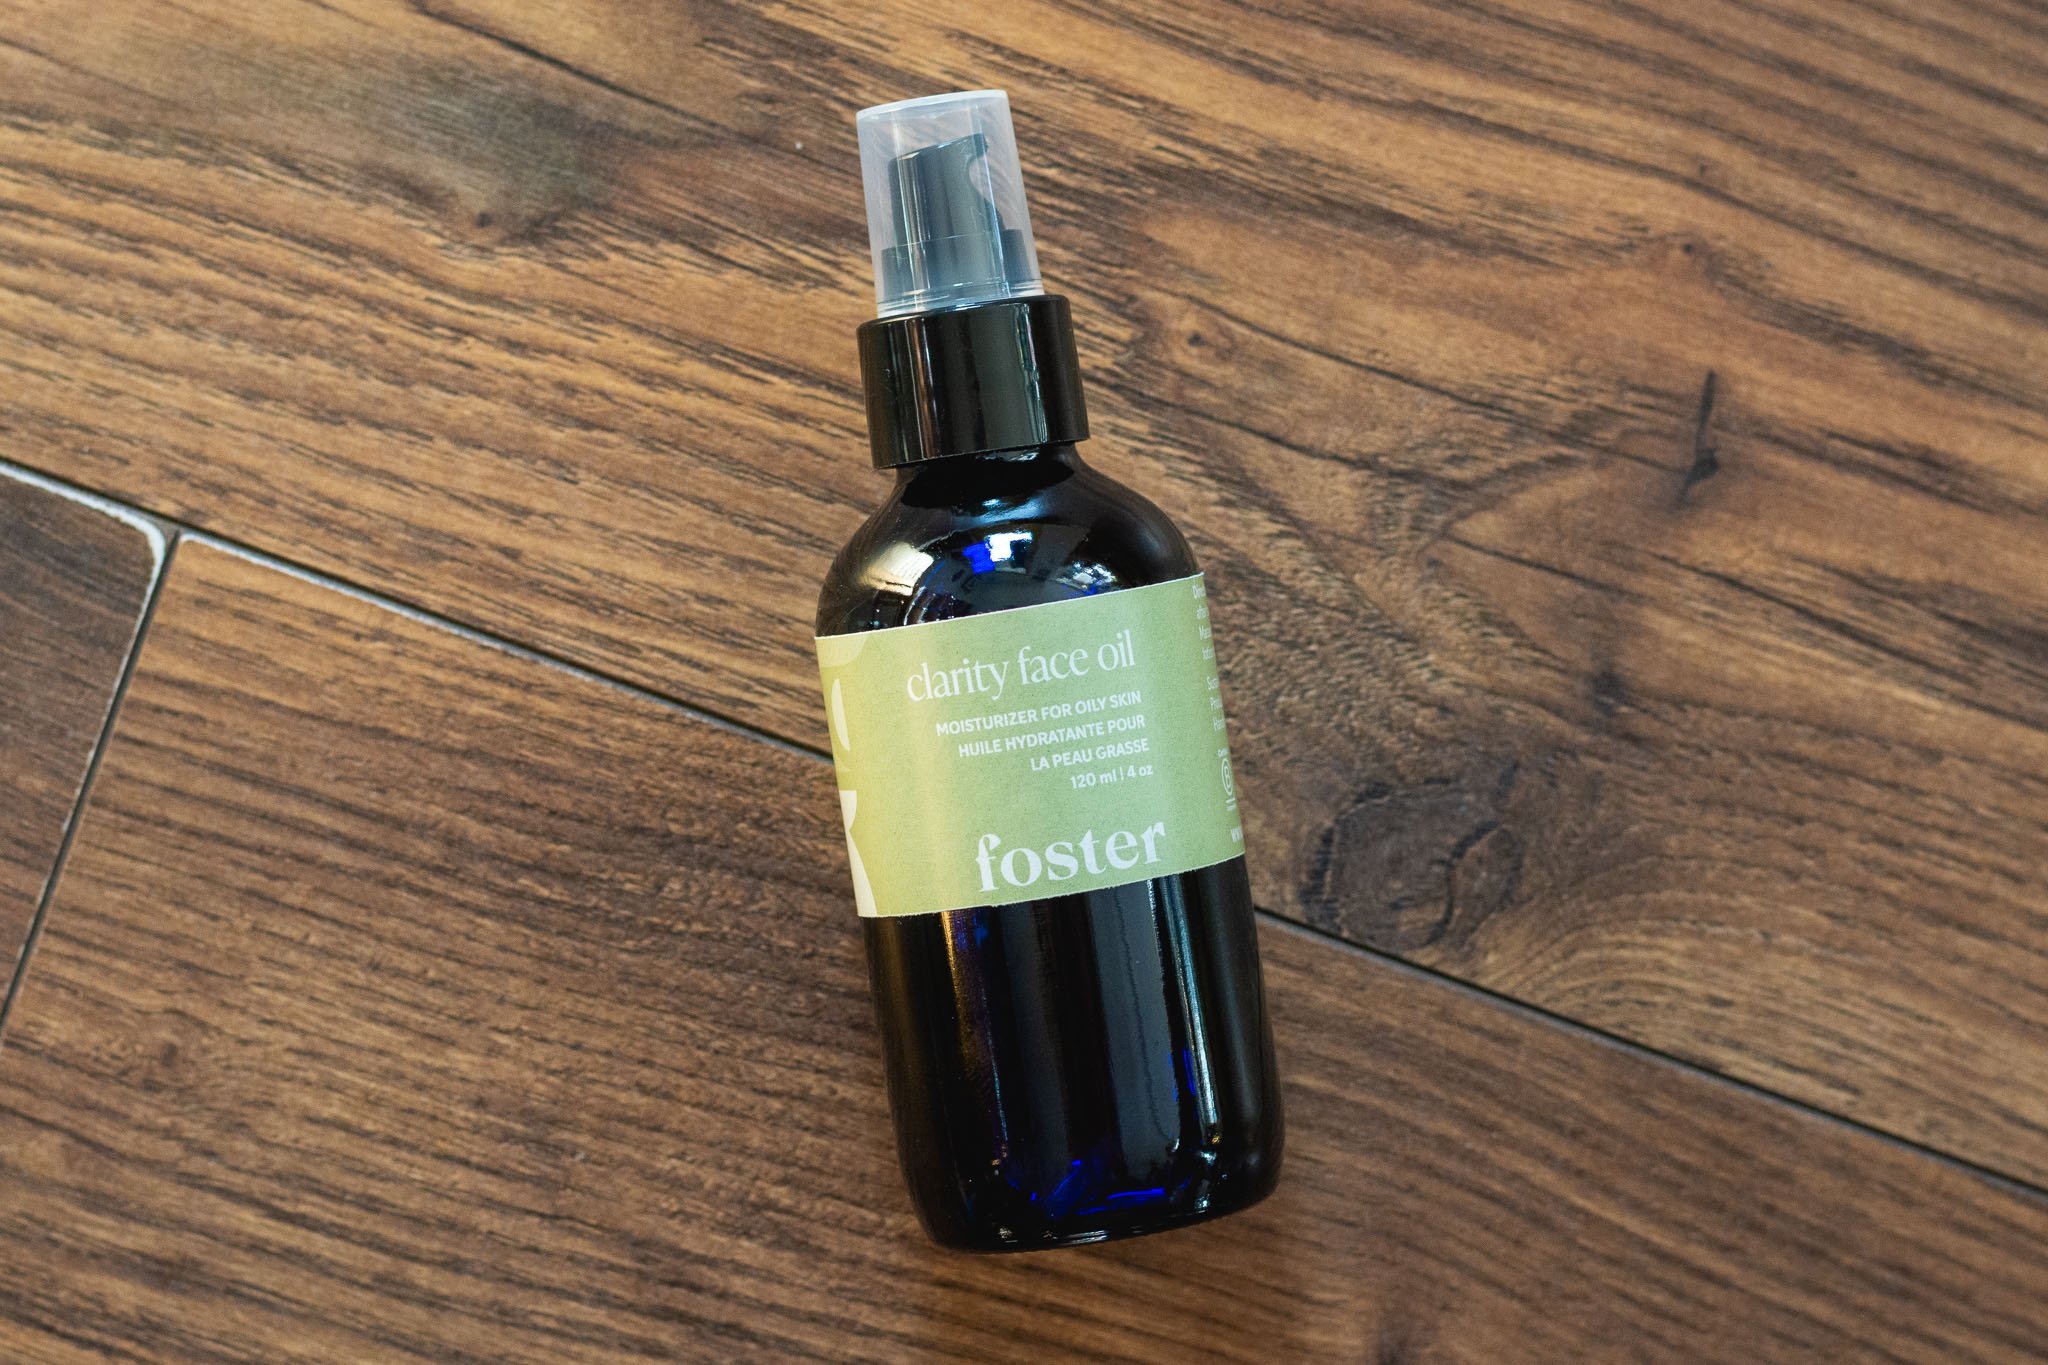 Clarity Face Oil by Foster